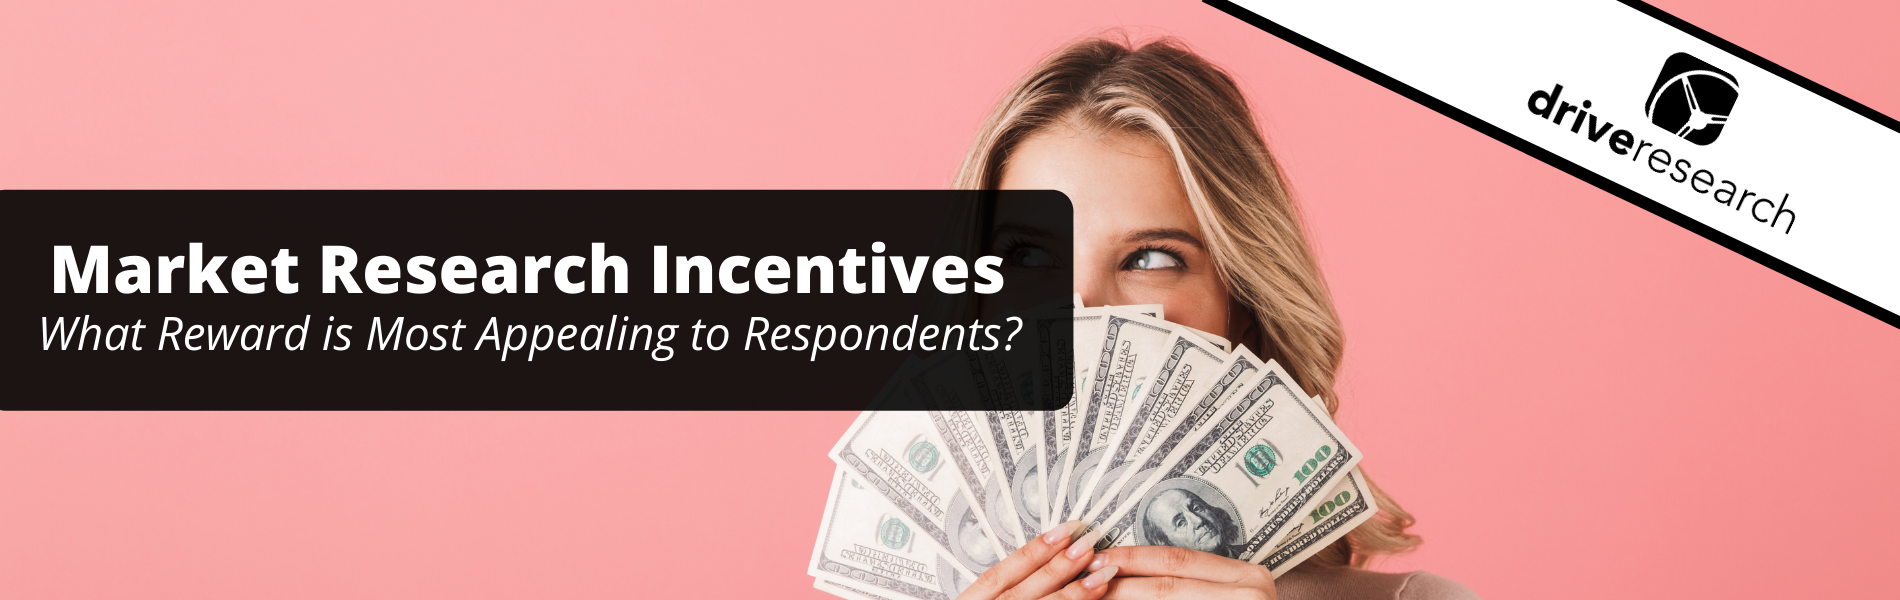 Market Research Incentives: New Survey Shows What Reward is Most Appealing to Respondents